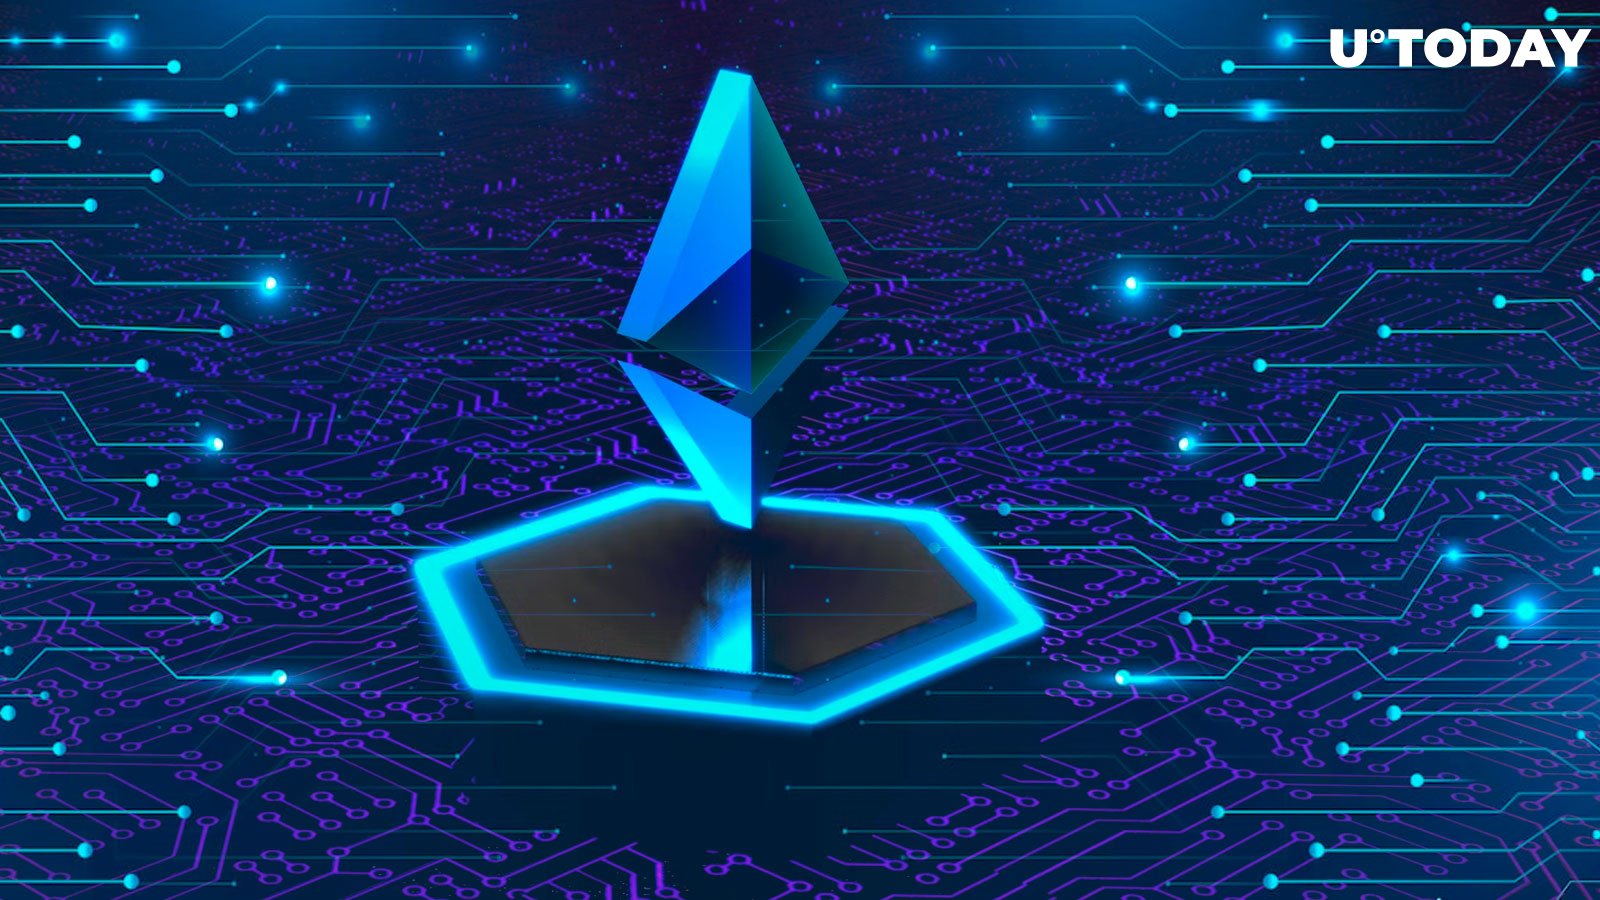 Ethereum Price Soars as “Merge” Upgrade Comes Even Closer